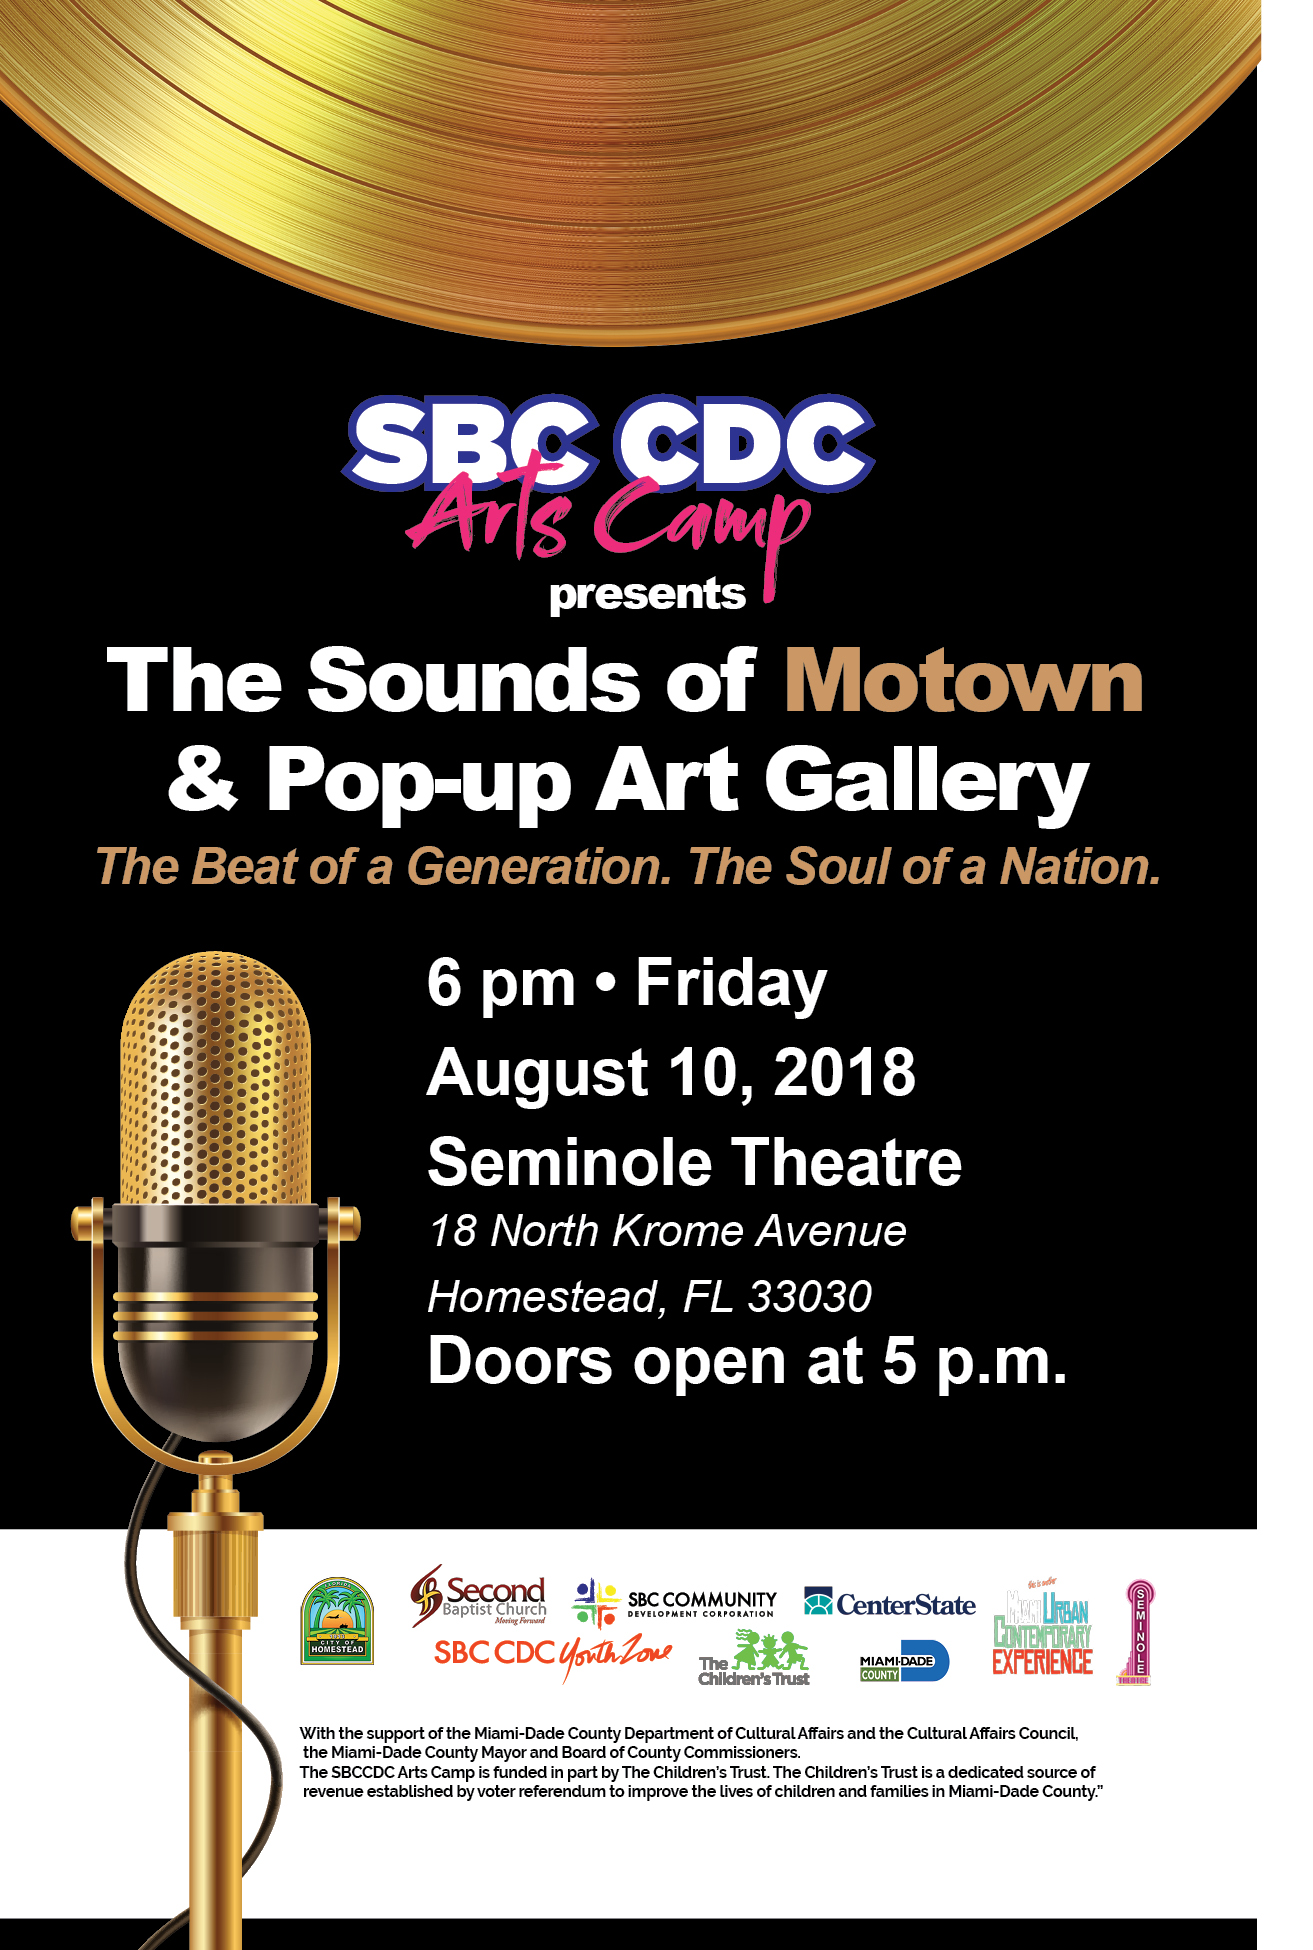 Event Flyer: The Sounds of Motown is a children's musical featuring student and professional actors on the real story of Berry Gordy and Motown Records. It celebrates the music that inspired a generation, defined an era, re-shaped the music industry, and changed our culture forever. This exhilarating show featuring a pre and post production art gallery will capture the essence of the visionary Founder and the artists who joined the label and who fought against prejudice and racism to bring America together.